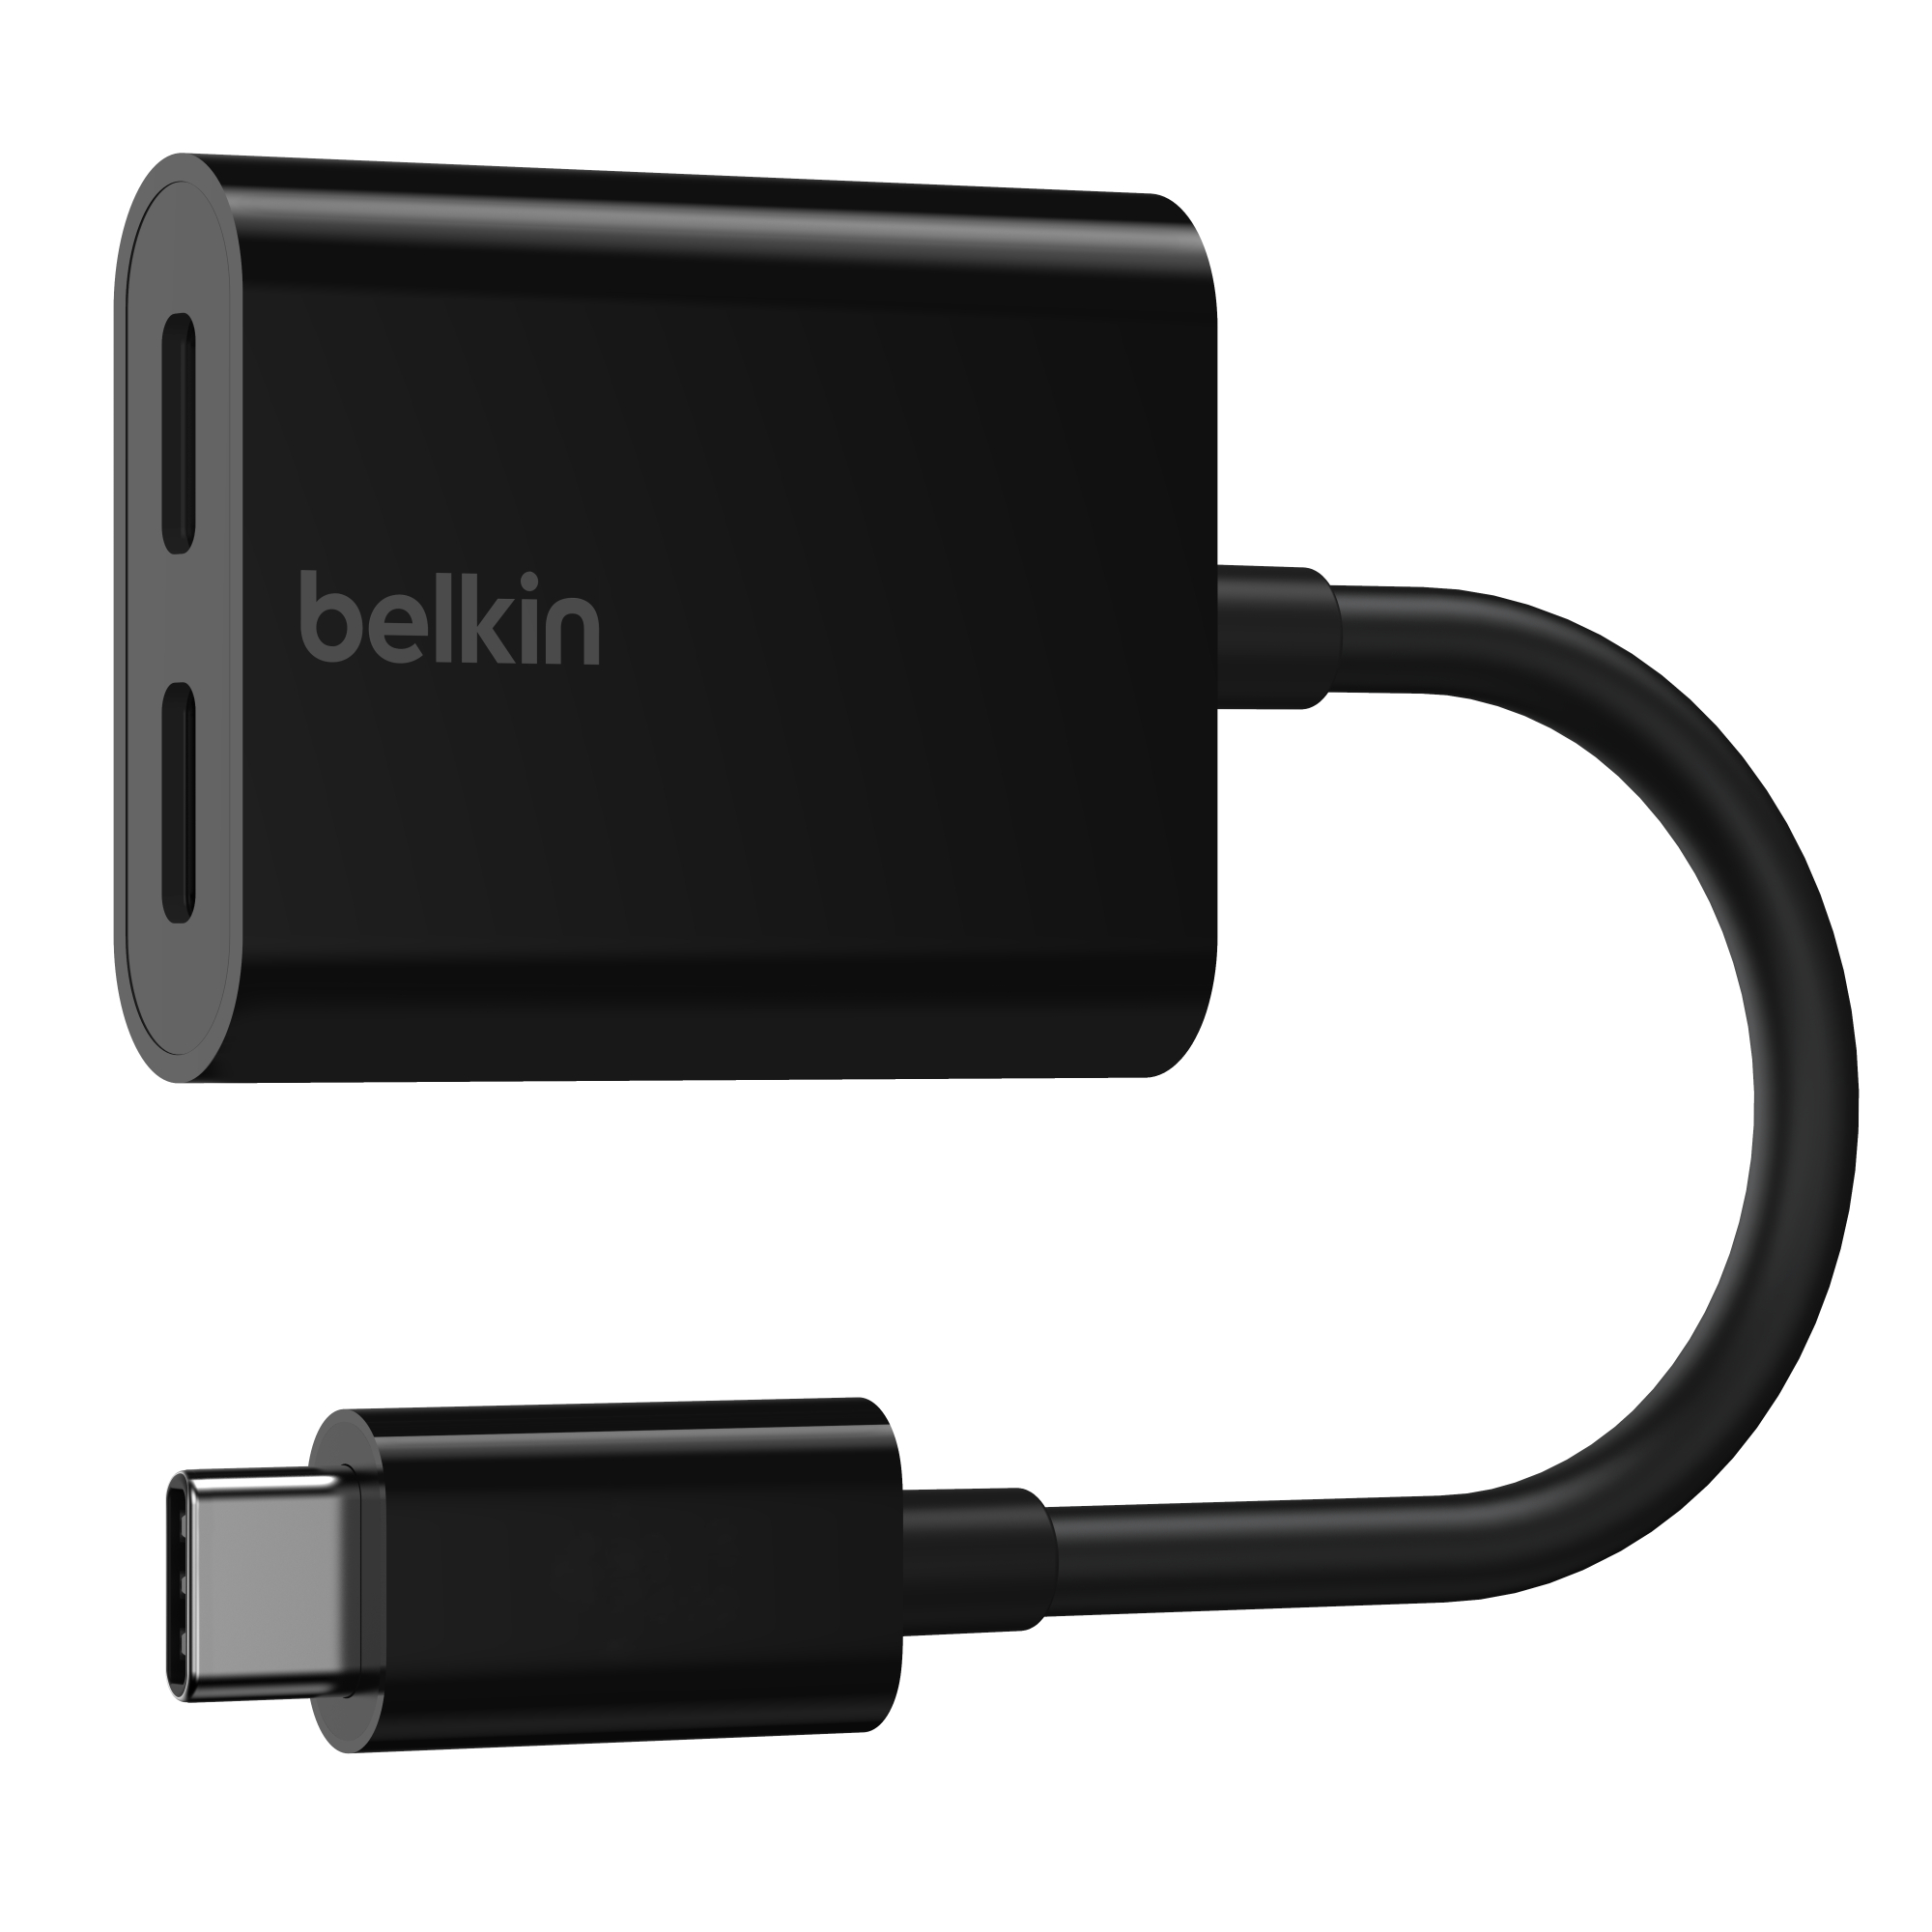 Belkin - Connect 4'6 USB Type C-to-USB Type C Adapter - Black